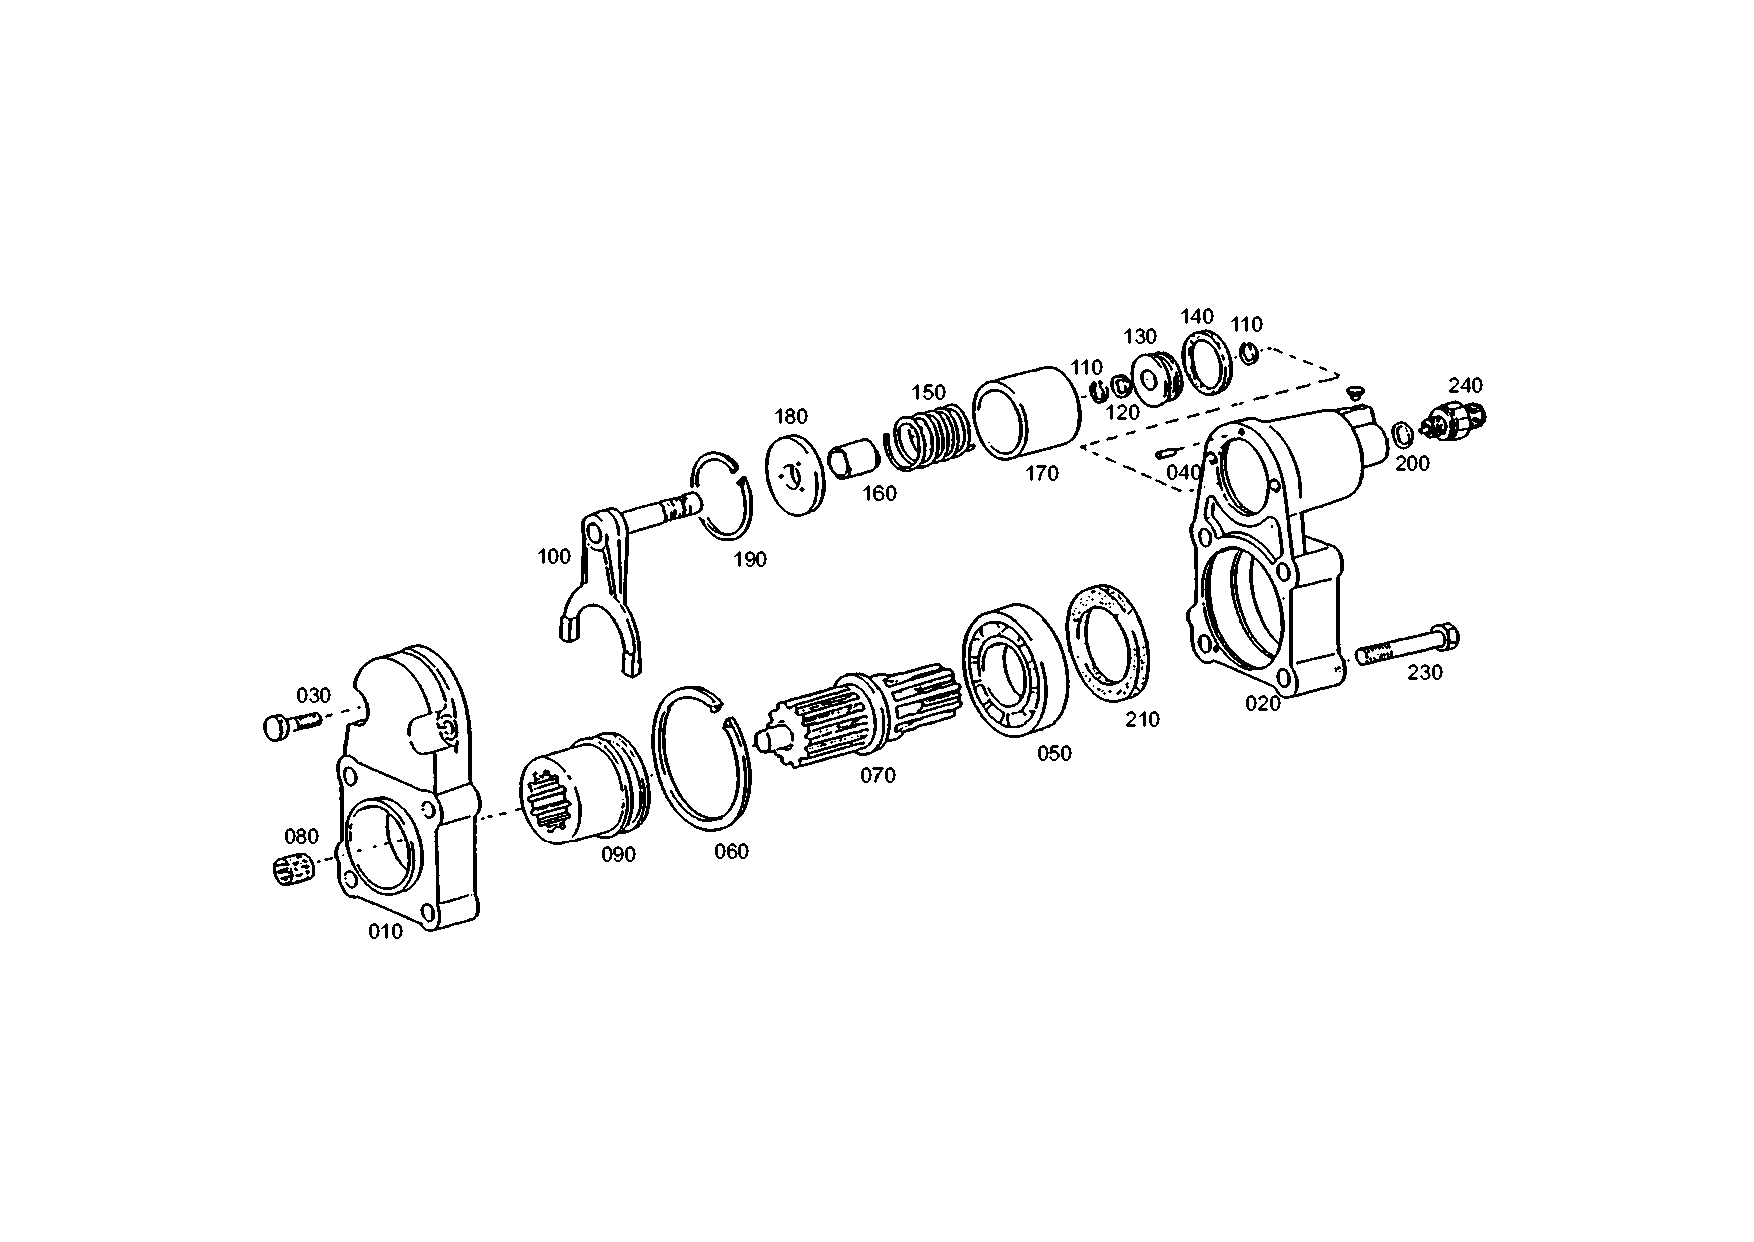 drawing for TITAN GMBH 1-99-976-003 - COMPRESSION SPRING (figure 4)